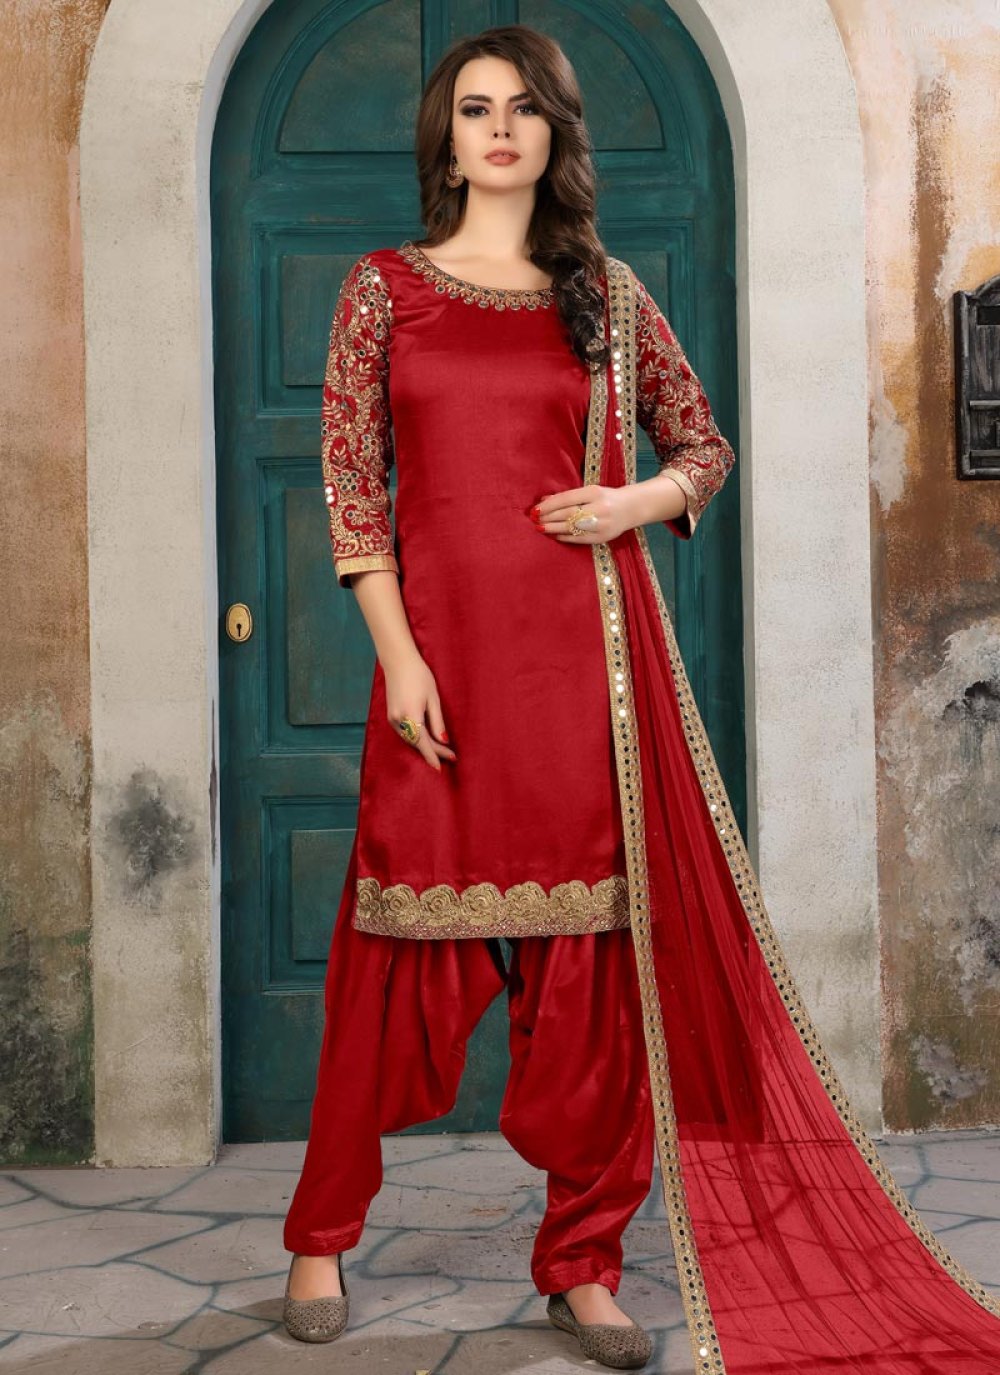 Aggregate more than 115 red patiala suit online super hot